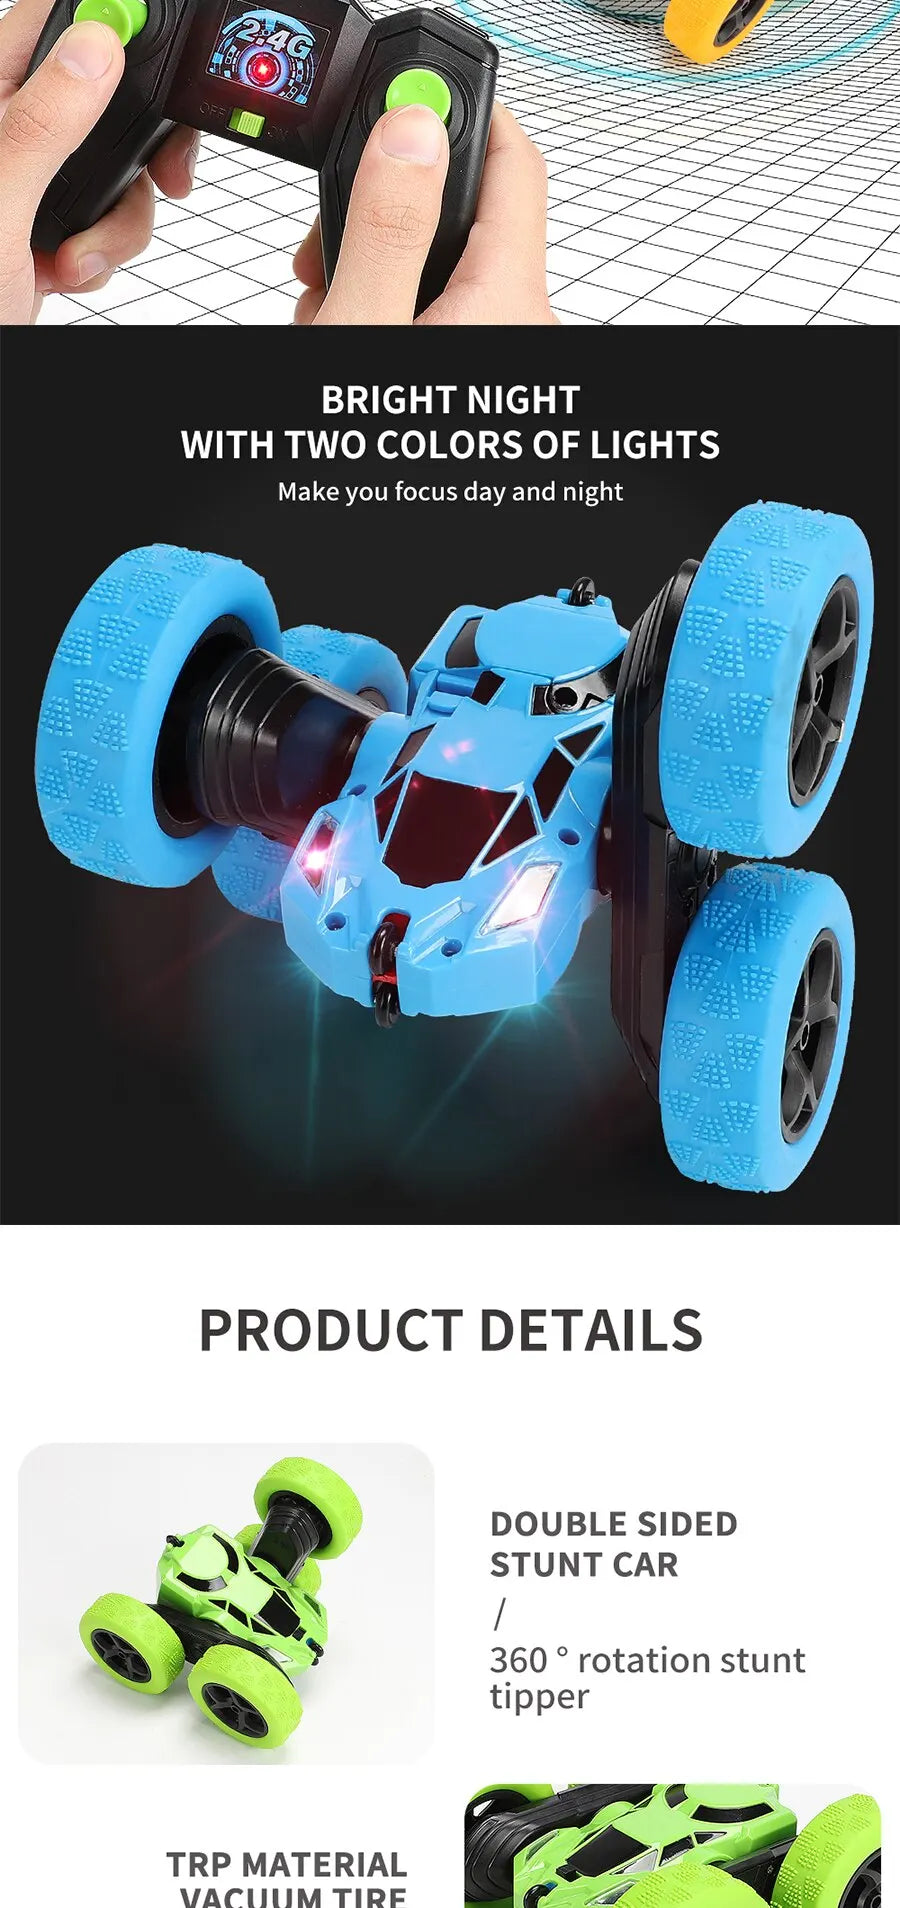 RC Stunt Car, BRIGHT NIGHT WITH TWO COLORS OF LIGHTS Make you focus day and